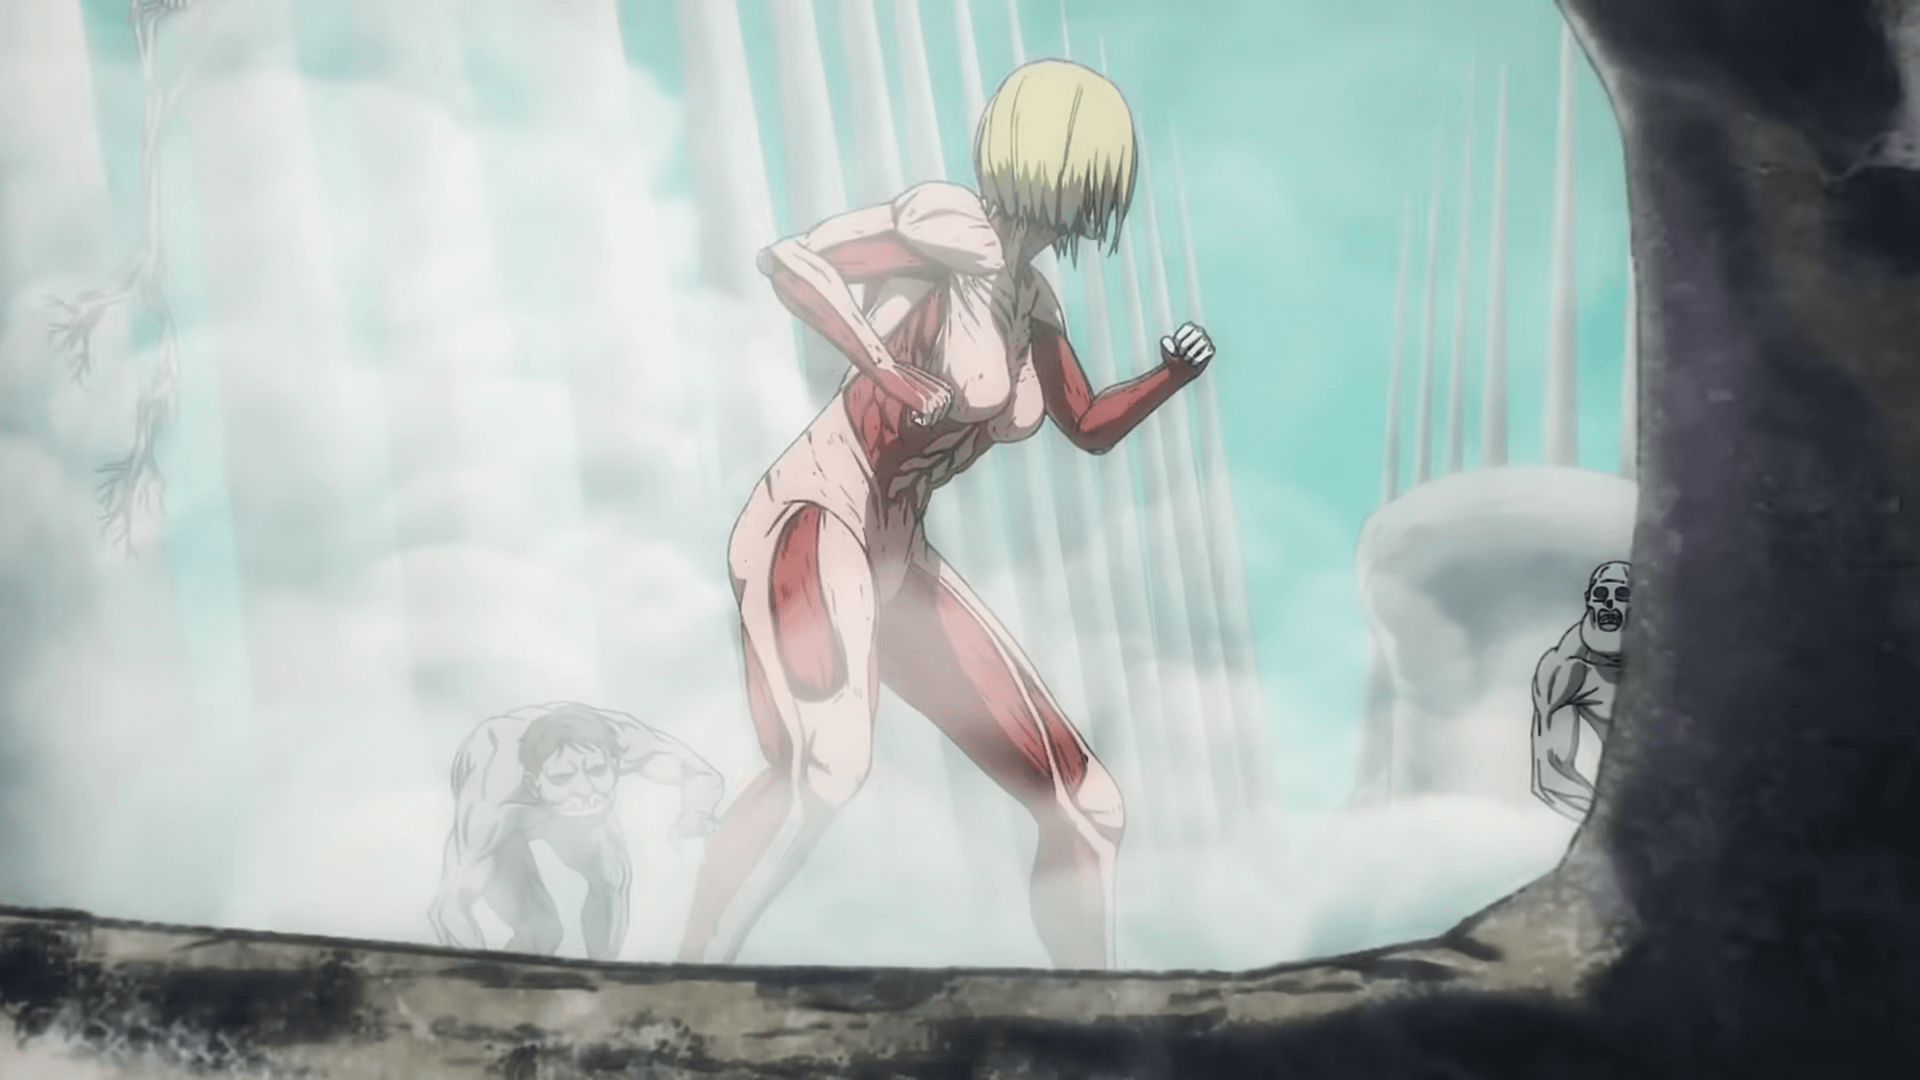 Attack On Titan Final Season The Final Chapters – Chapter 2 Trailer